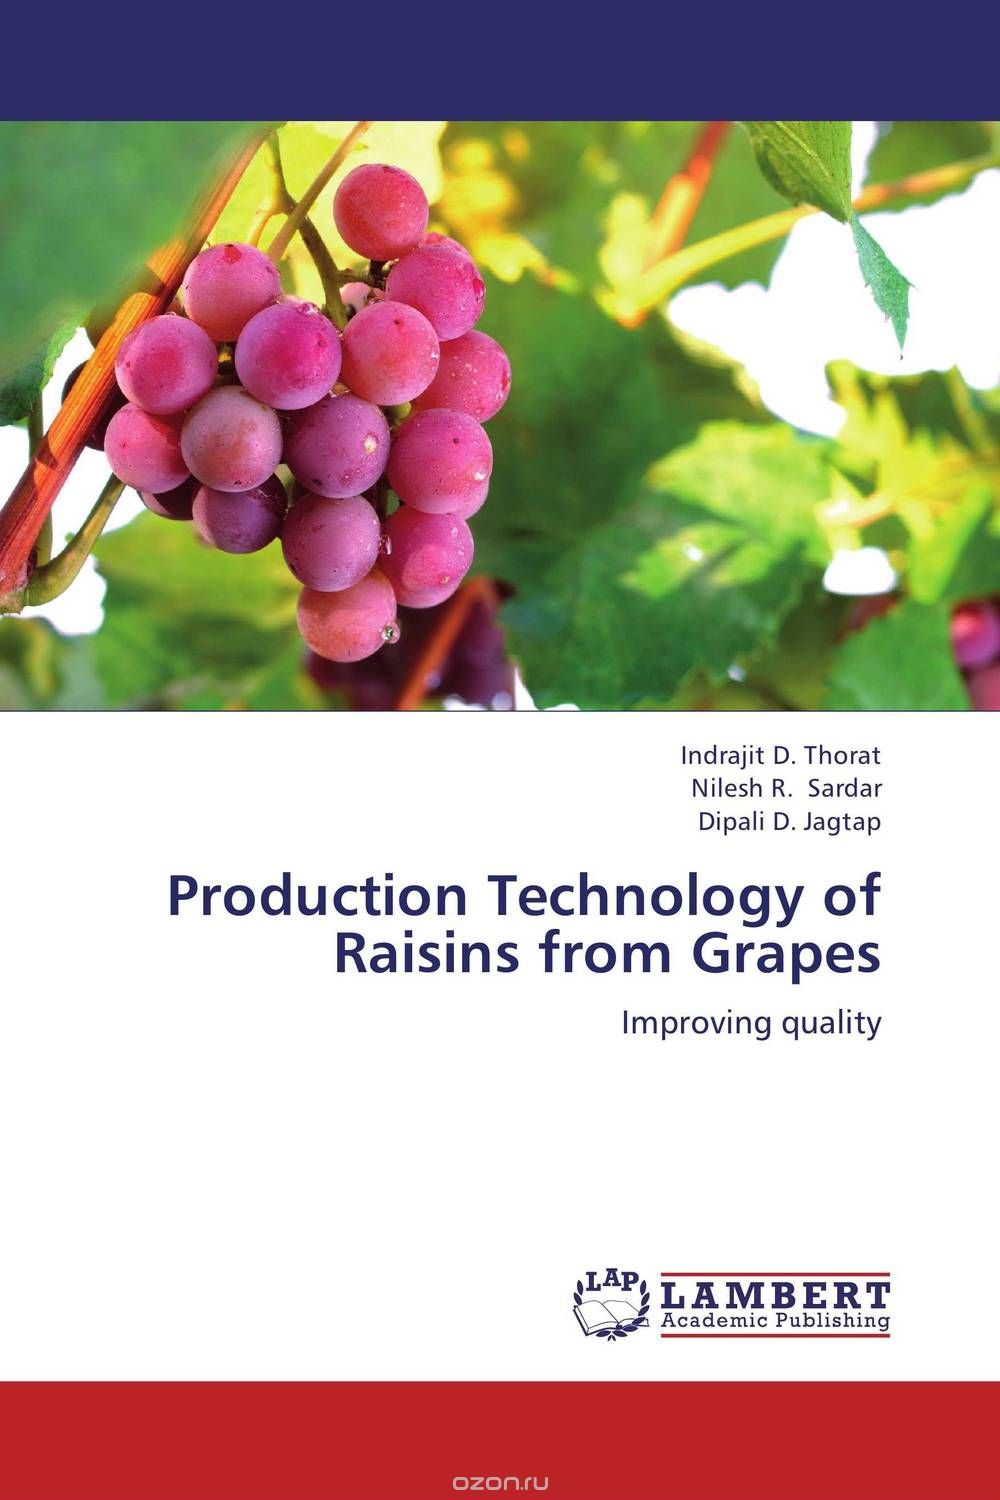 Production Technology of Raisins from Grapes